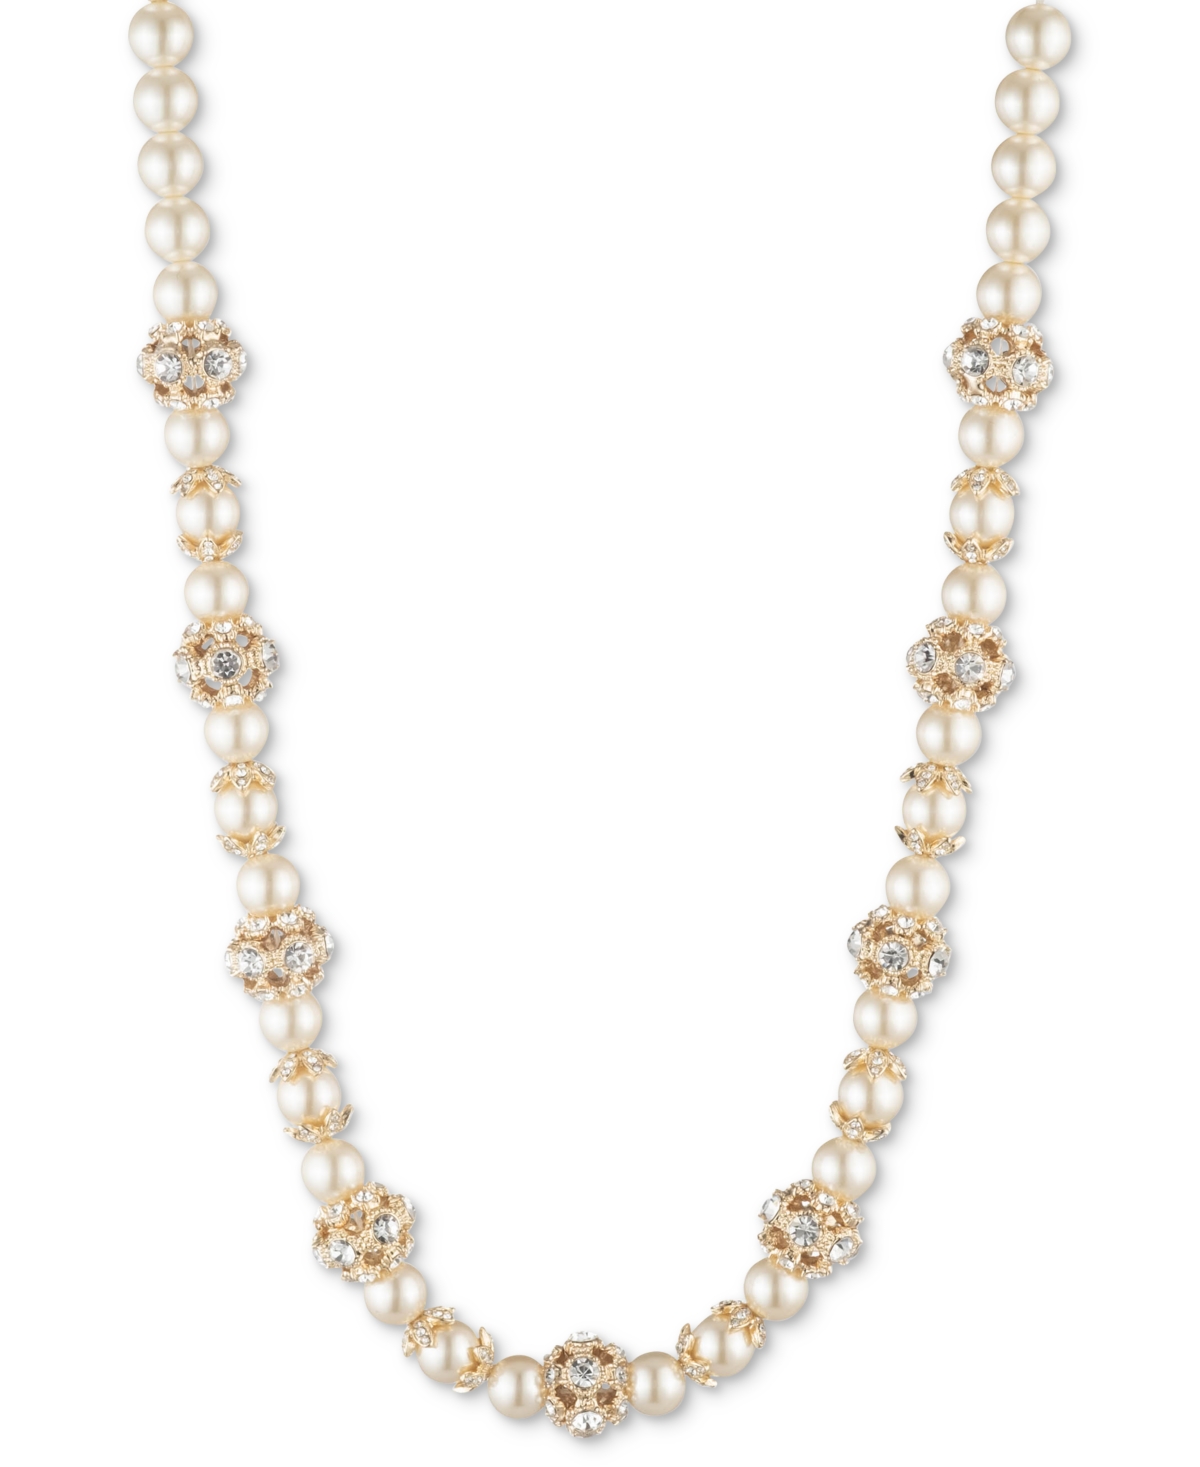 Gold-Tone Imitation Pearl & Crystal Button Station Necklace, 16" + 3" extender - Gold